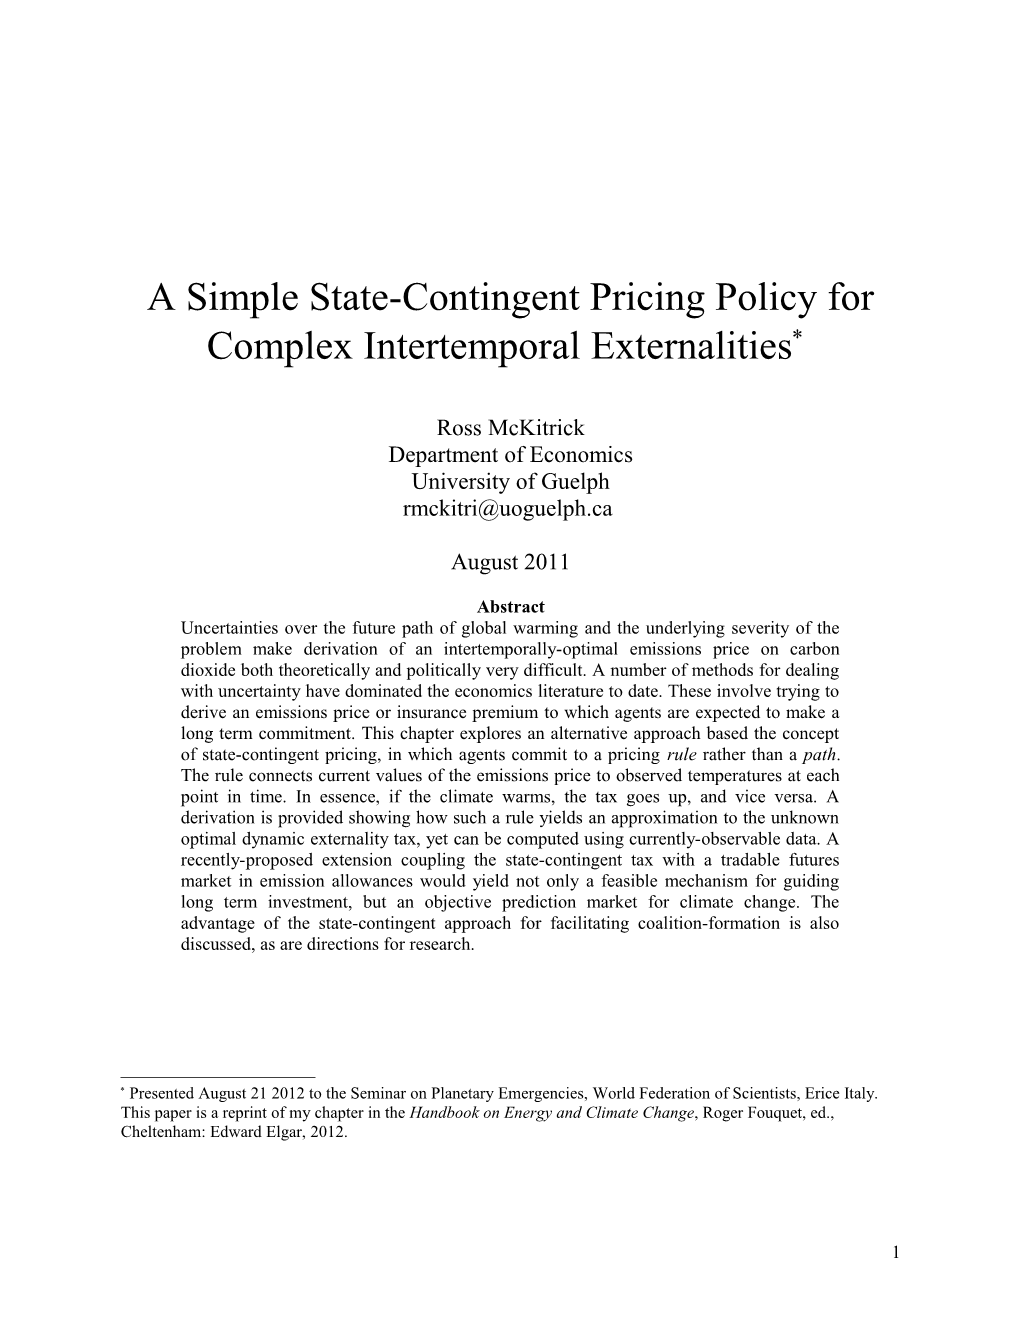 State-Contingent Pricing and Uncertainty in Climate Policy